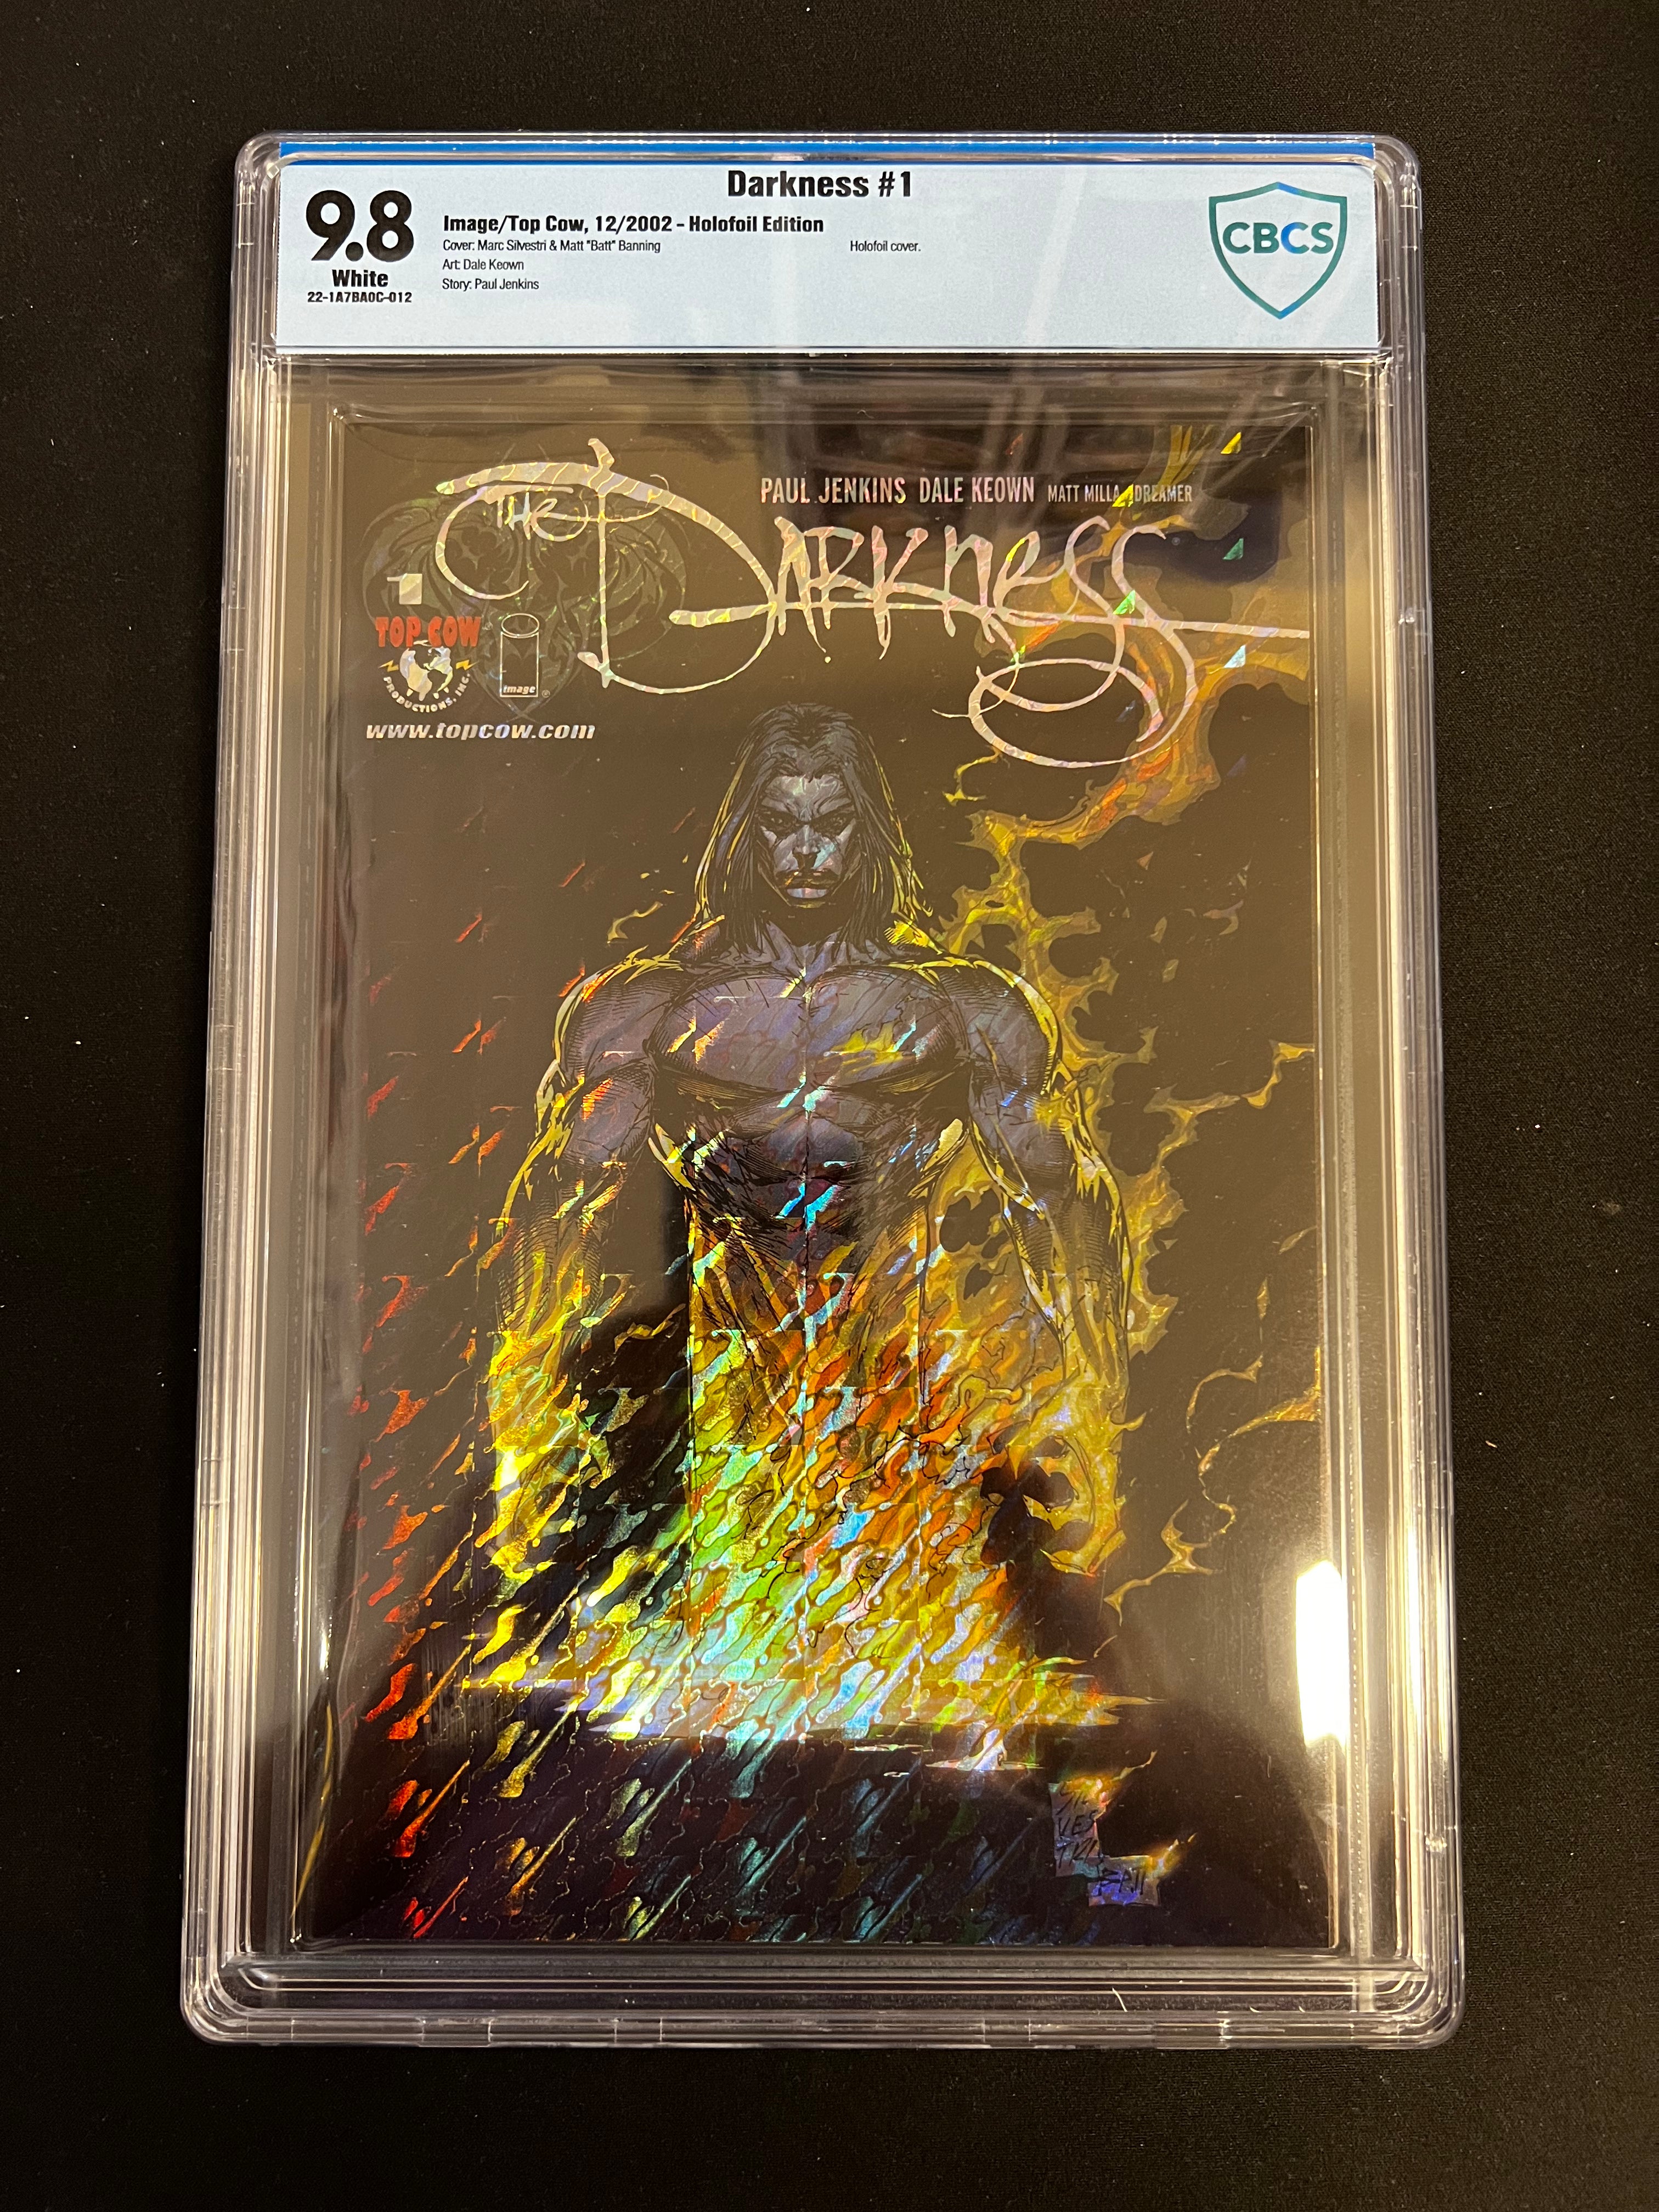 Darkness #1 CBCS 9.8 Holofoil Edition